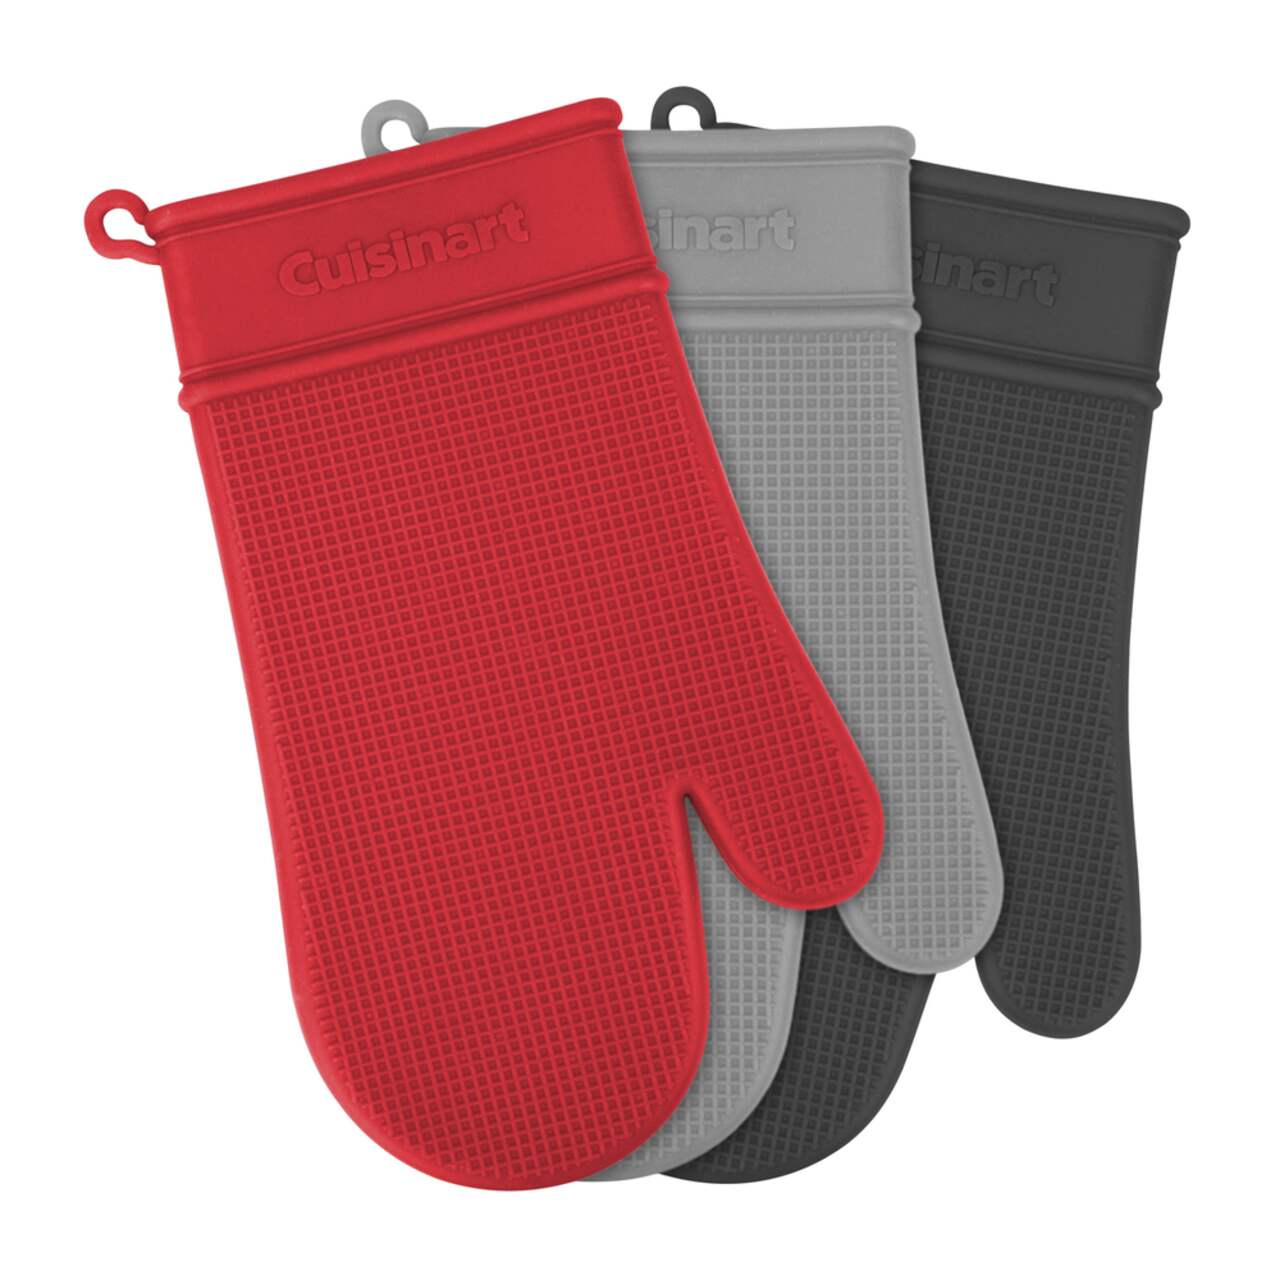 https://media-www.canadiantire.ca/product/living/kitchen/dining-and-entertaining/2992513/cuisinart-2-pack-silicone-oven-mitt-42af7900-30ac-447b-9525-434ae07ad08e.png?imdensity=1&imwidth=640&impolicy=mZoom